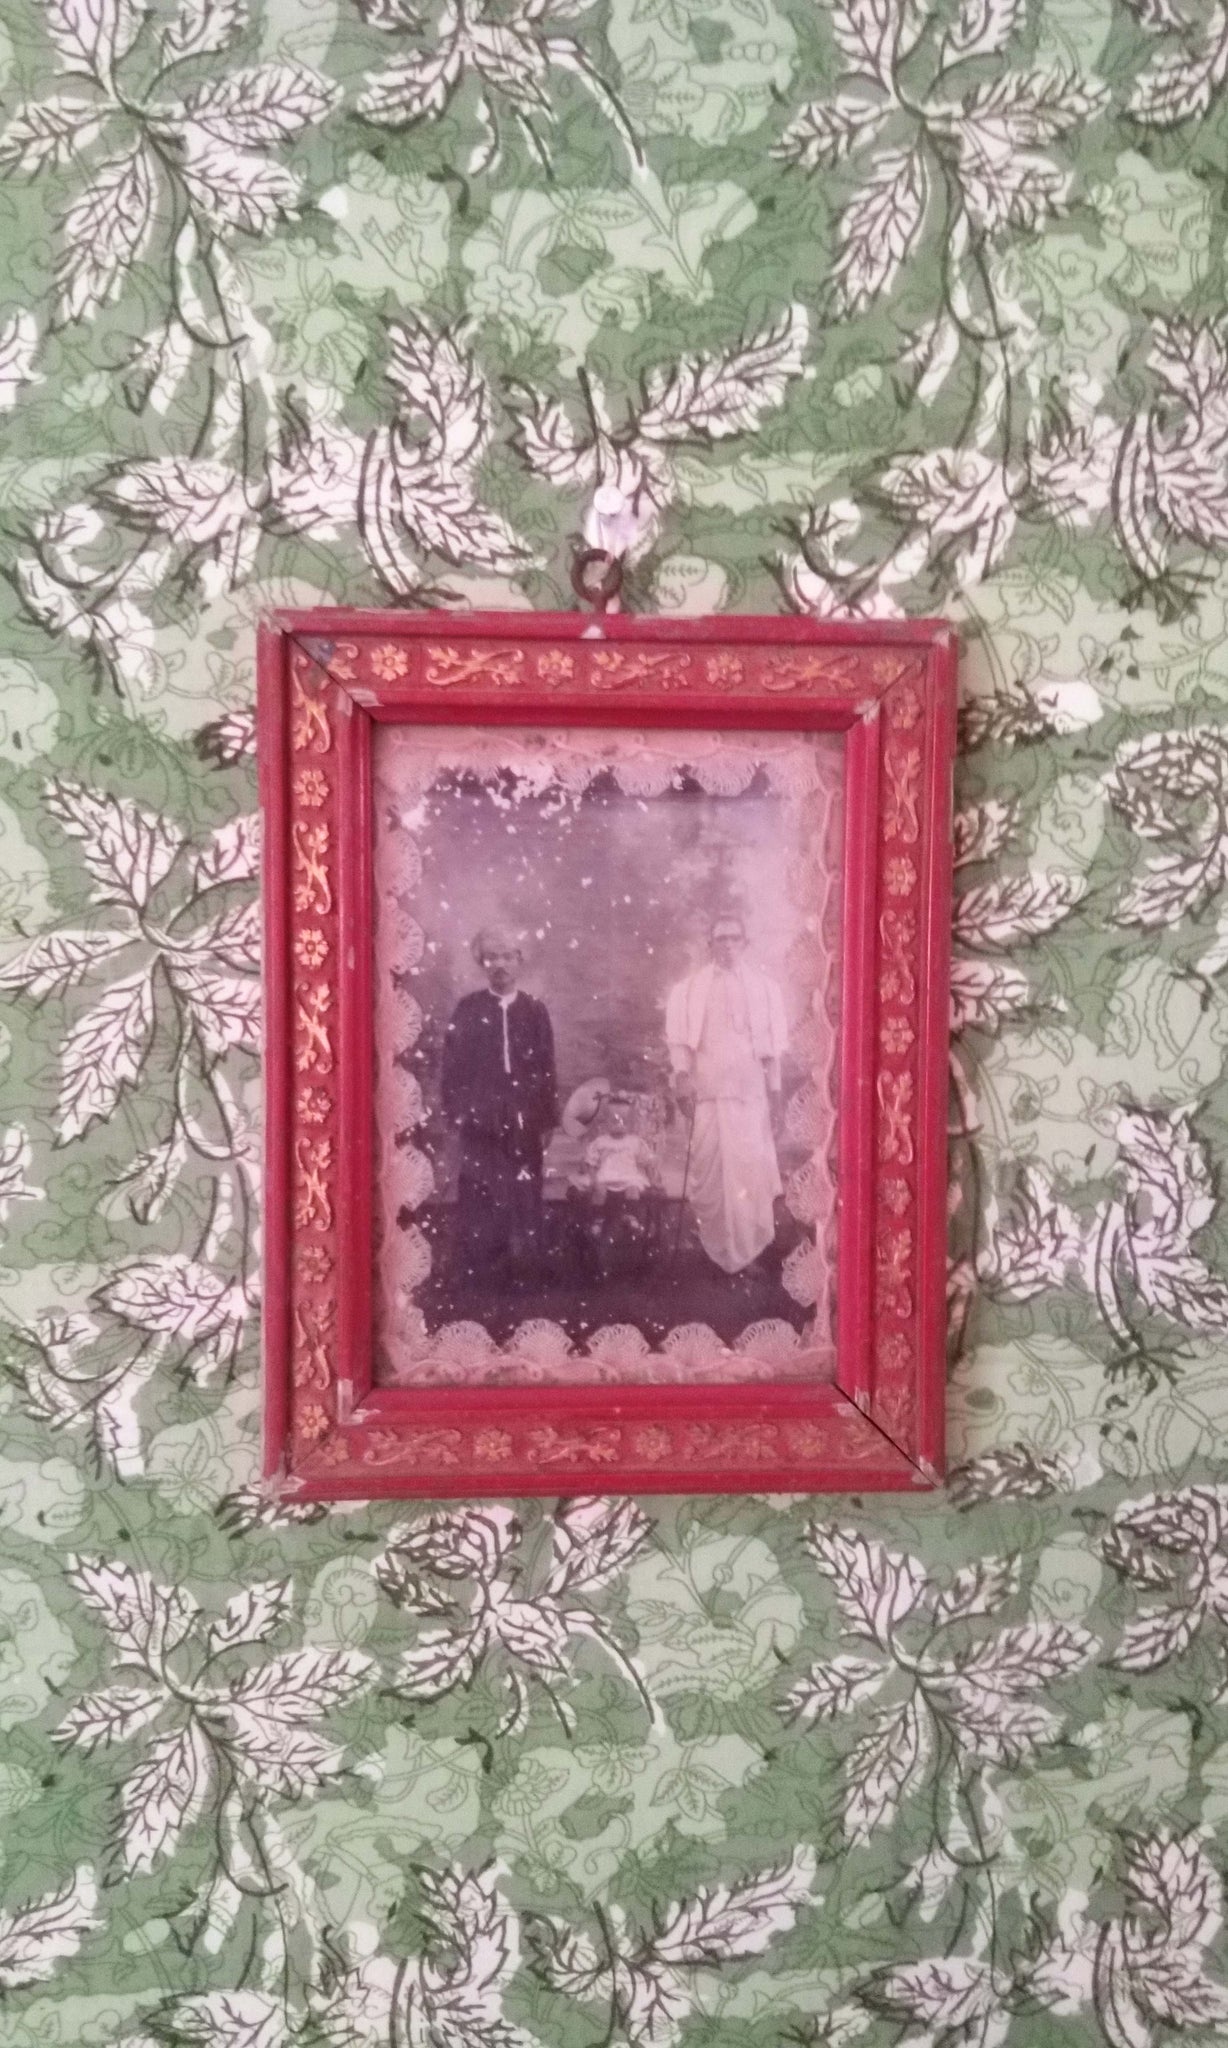 x64 Relic Photograph Retained In Weathered Frame | From An Old House In Tamilnadu